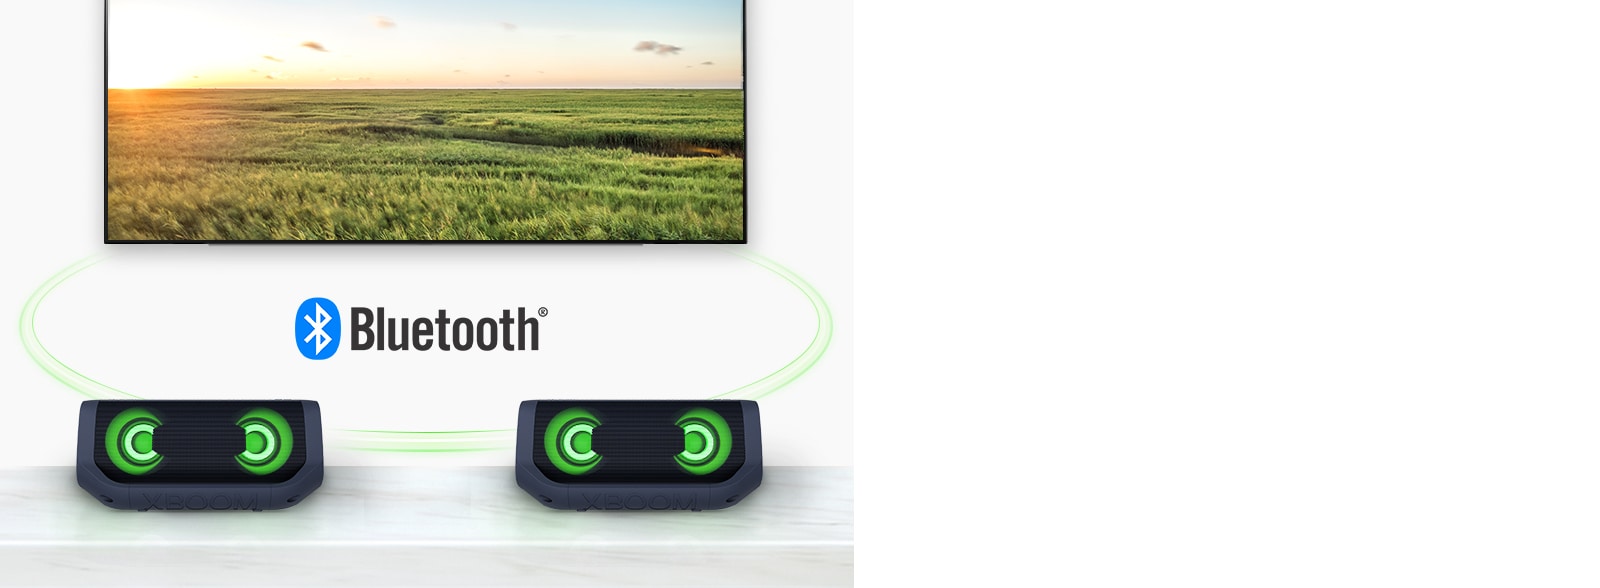 On a table, two LG XBOOM Go with green lighting are in front of a TV showing a field.